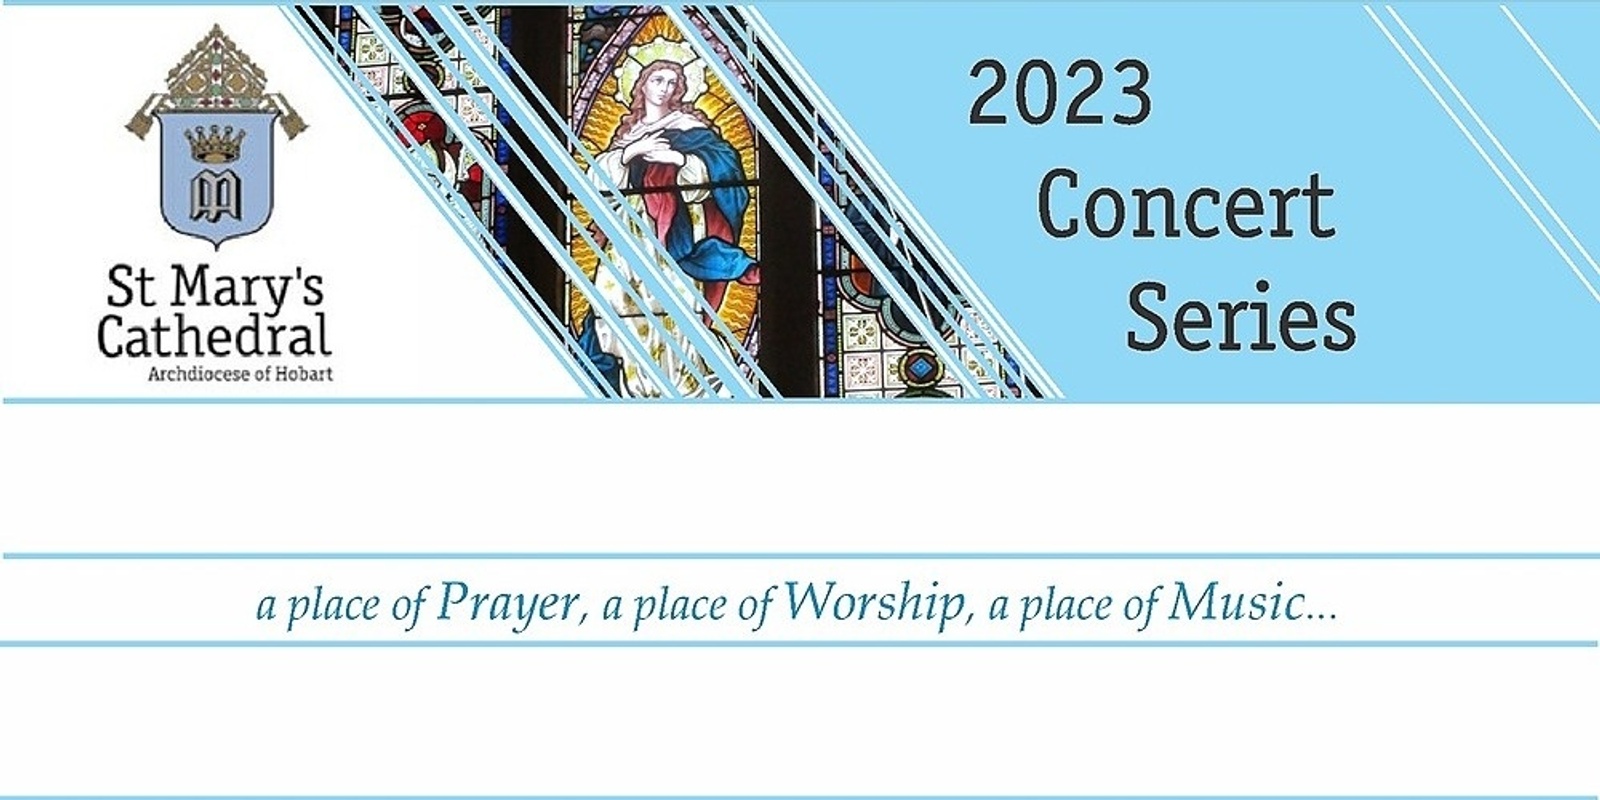 St Mary's Cathedral 2023 Concert Series